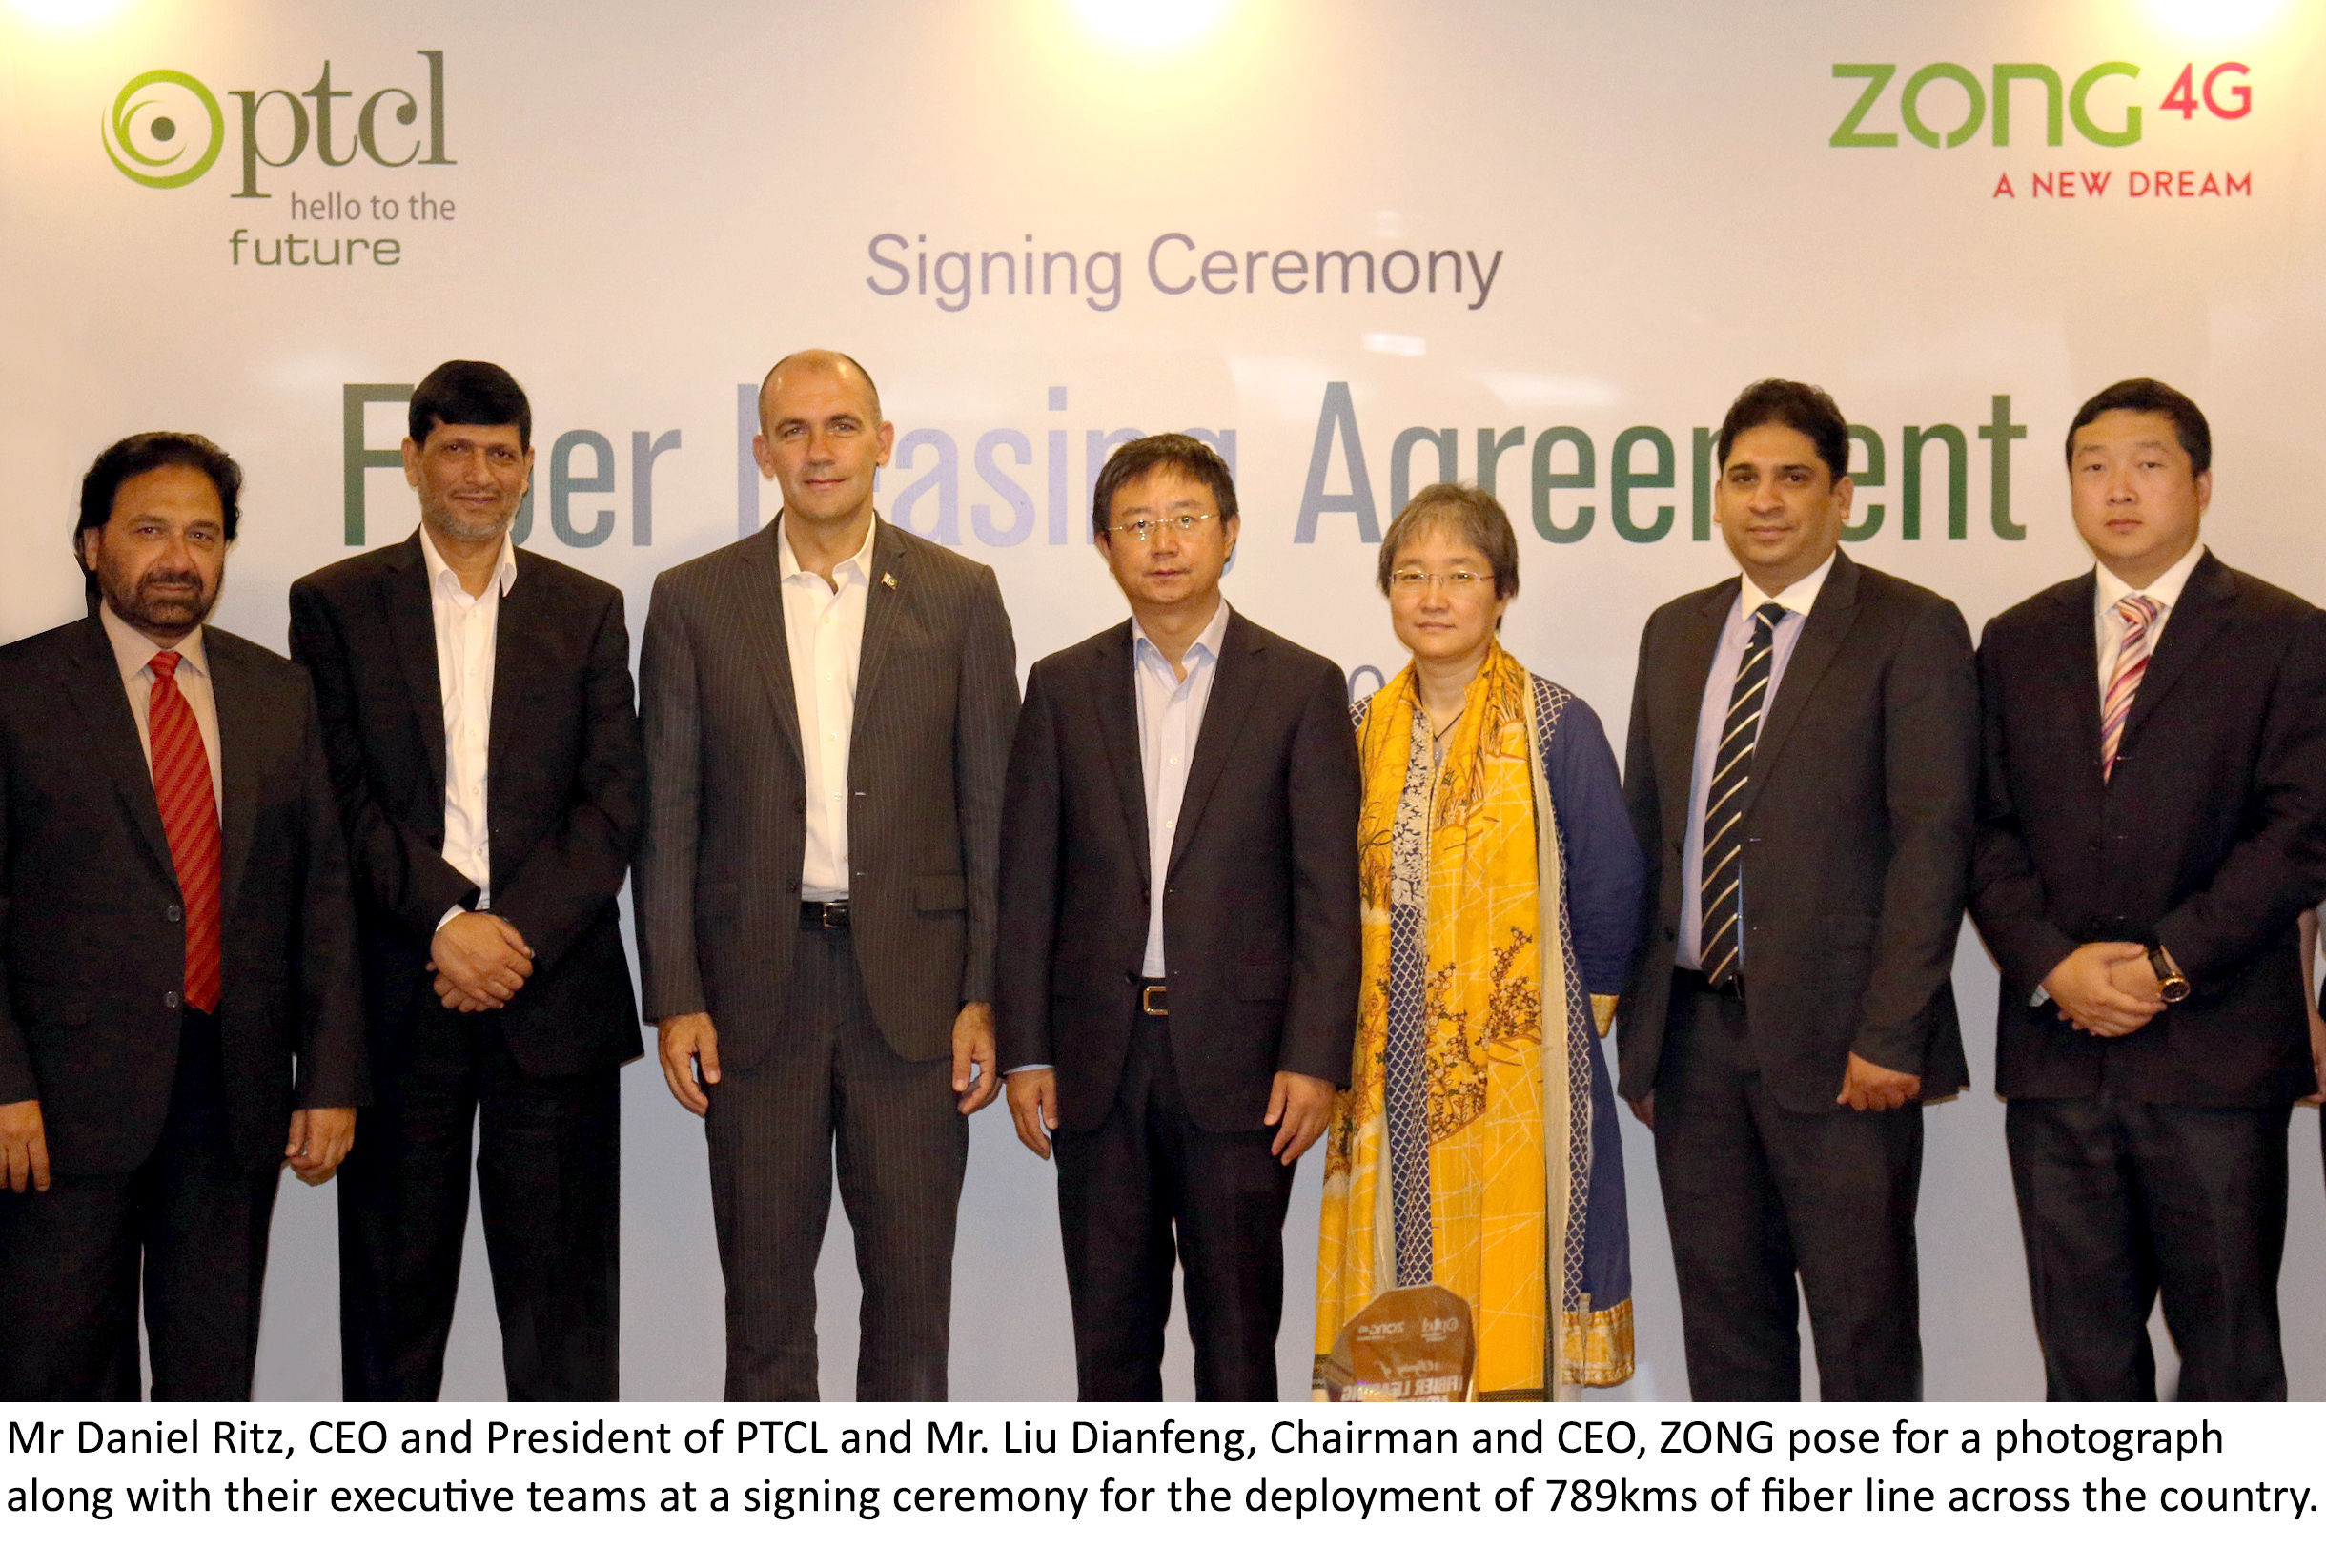 Zong & PTCL Group Pic